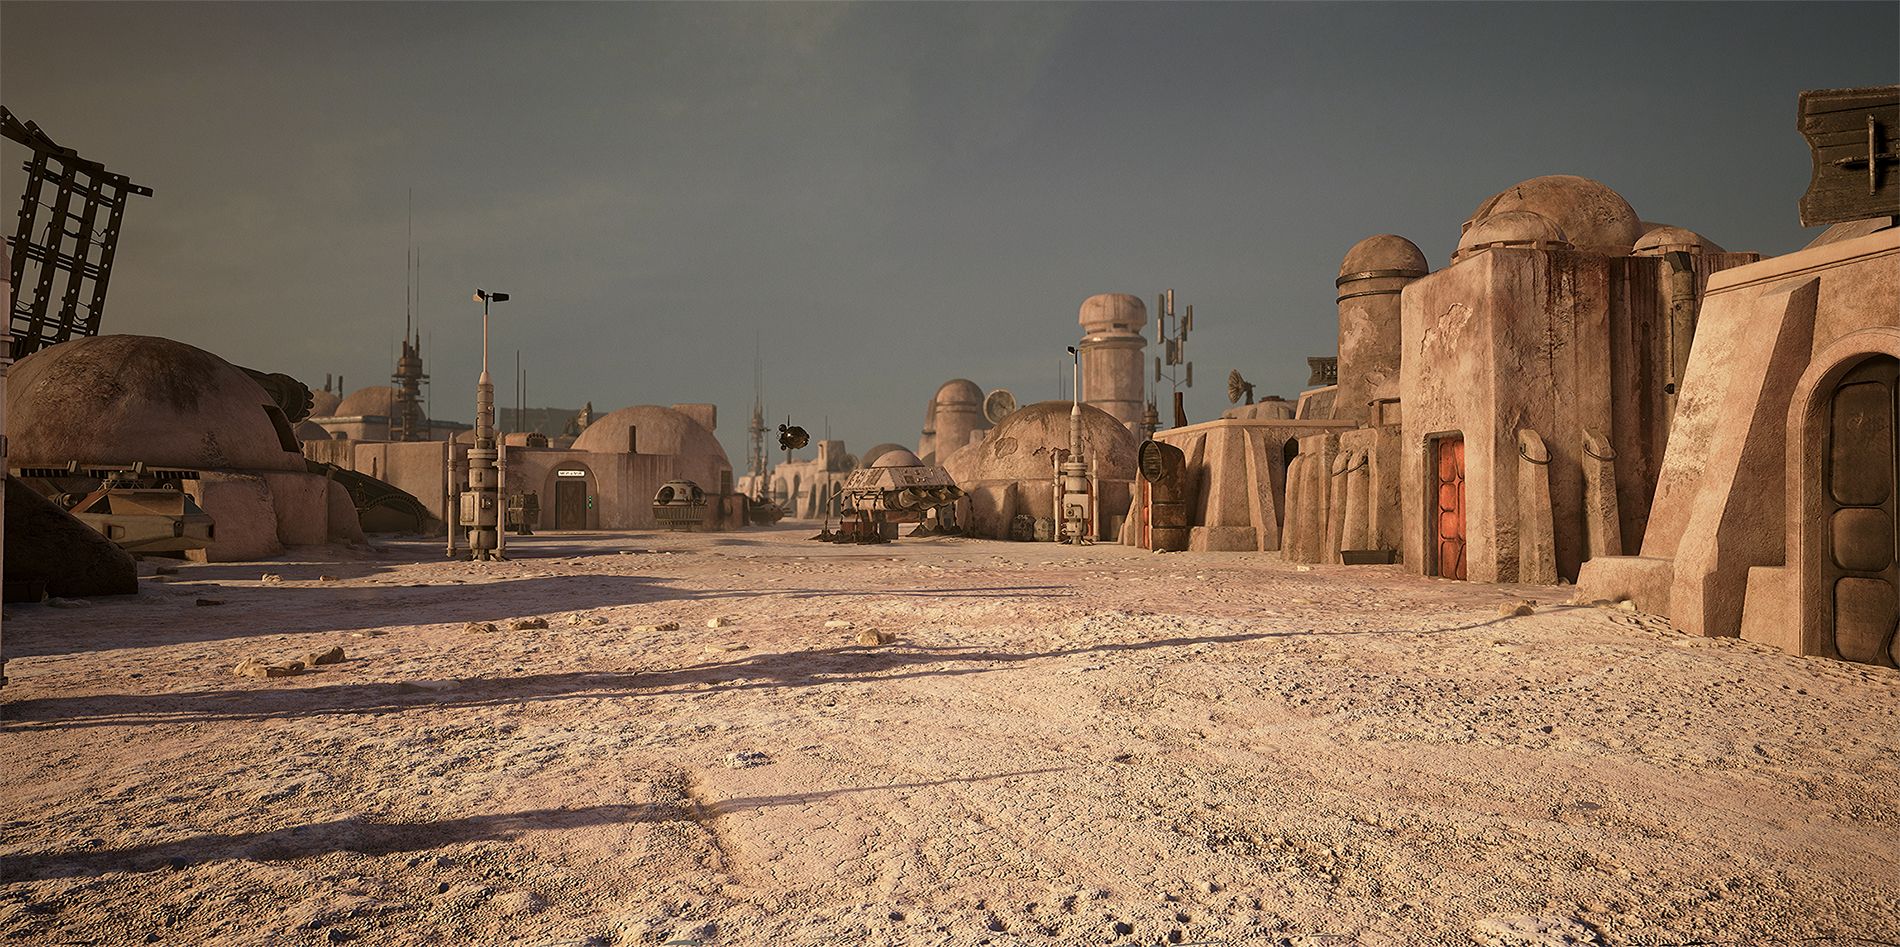 Free download Star Wars Mos Eisley Space Port Unreal Engine Forums [1900x947] for your Desktop, Mobile & Tablet. Explore Star Wars Mos Eisley Background. Star Wars Mos Eisley Background